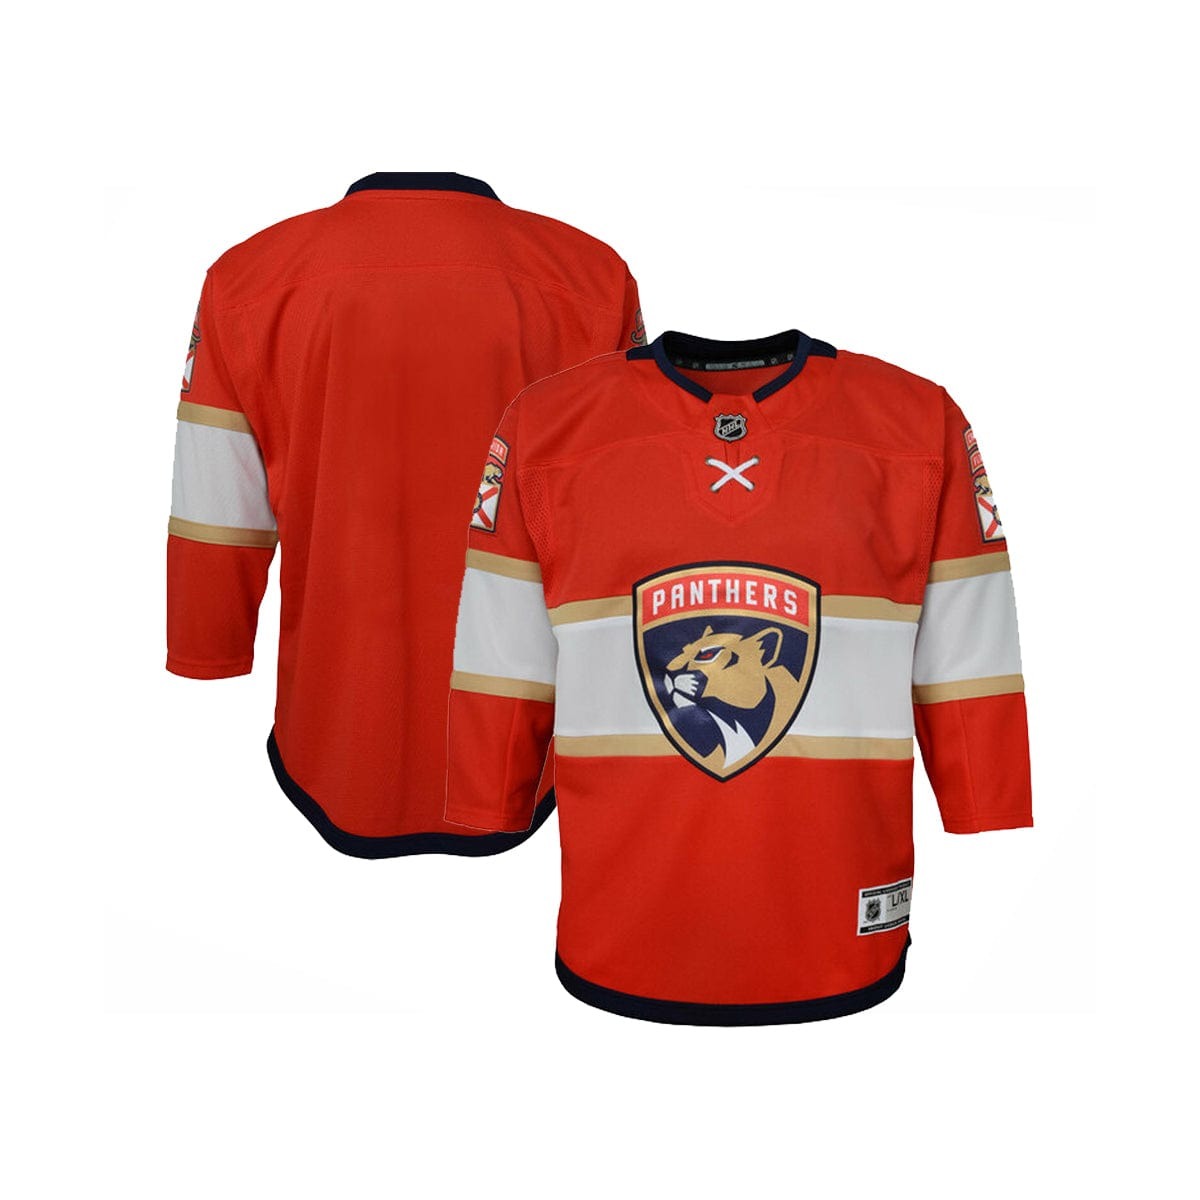 Outerstuff Reverse Retro Premier Jersey - Florida Panthers - Youth